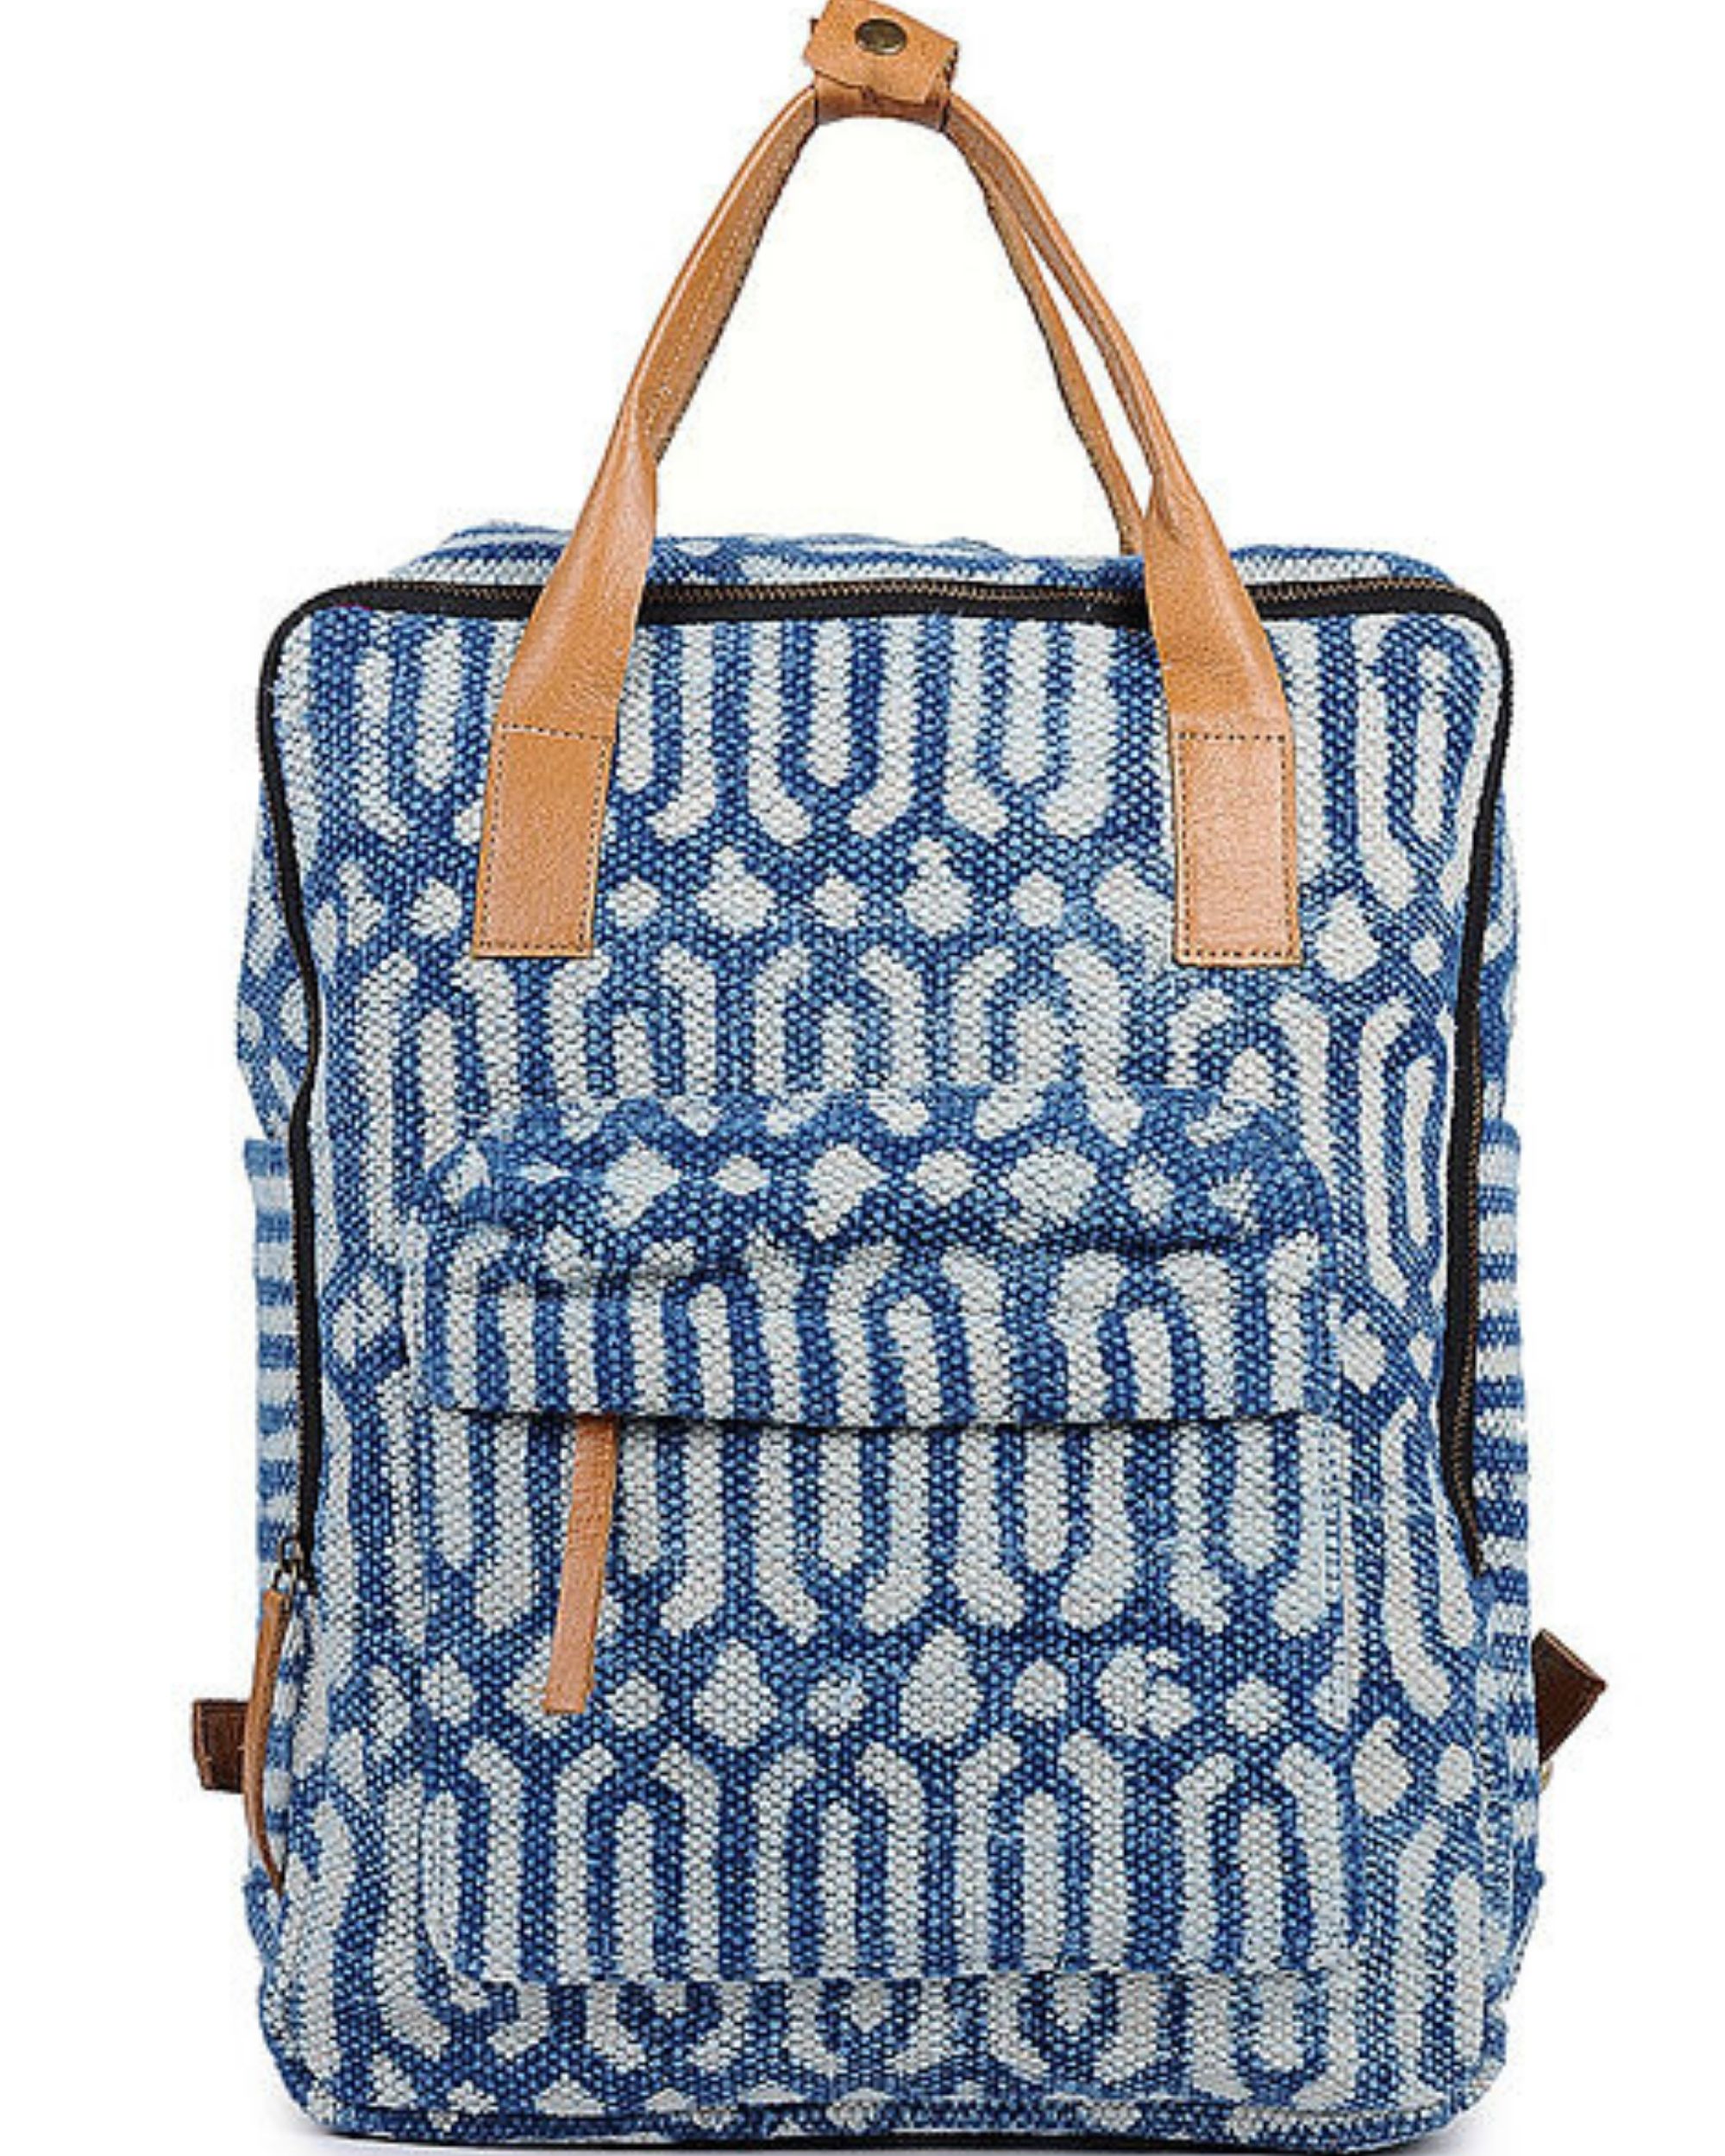 Indigo hand-printed cotton rug and leather backpack